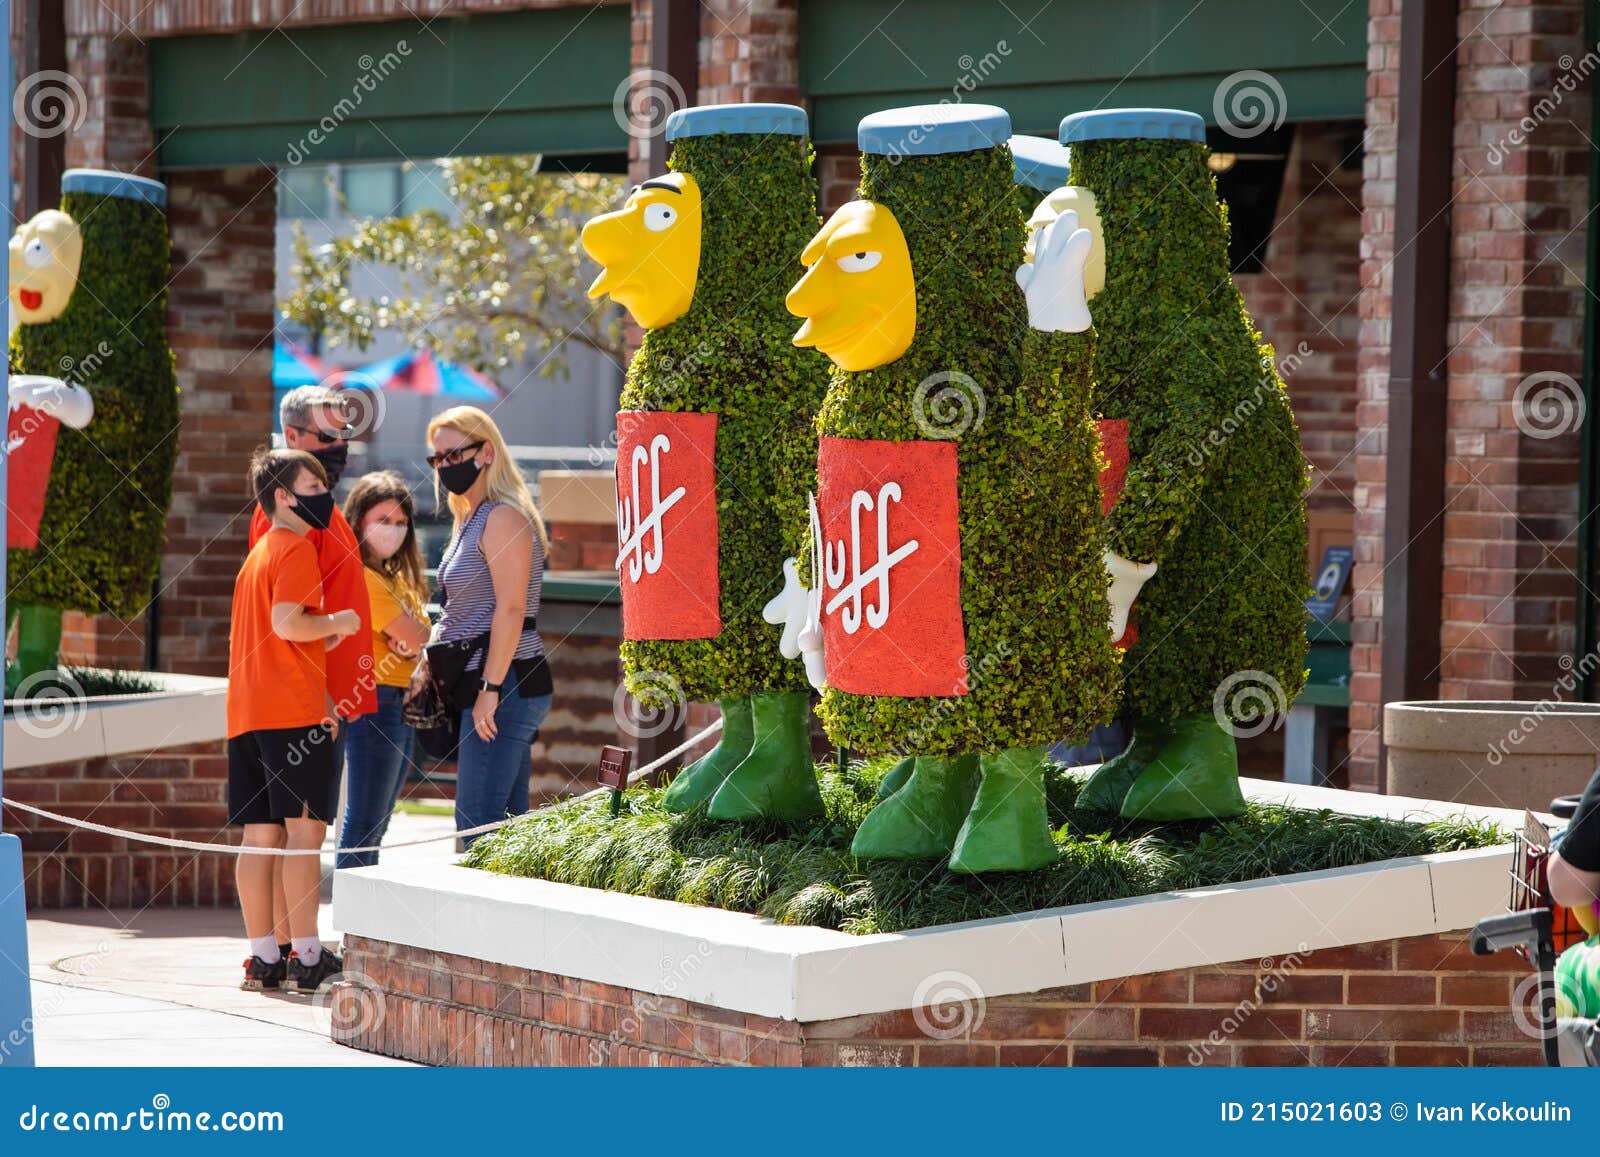 The Simpsons Universal Studios Parks Duffman Duff Beer Can